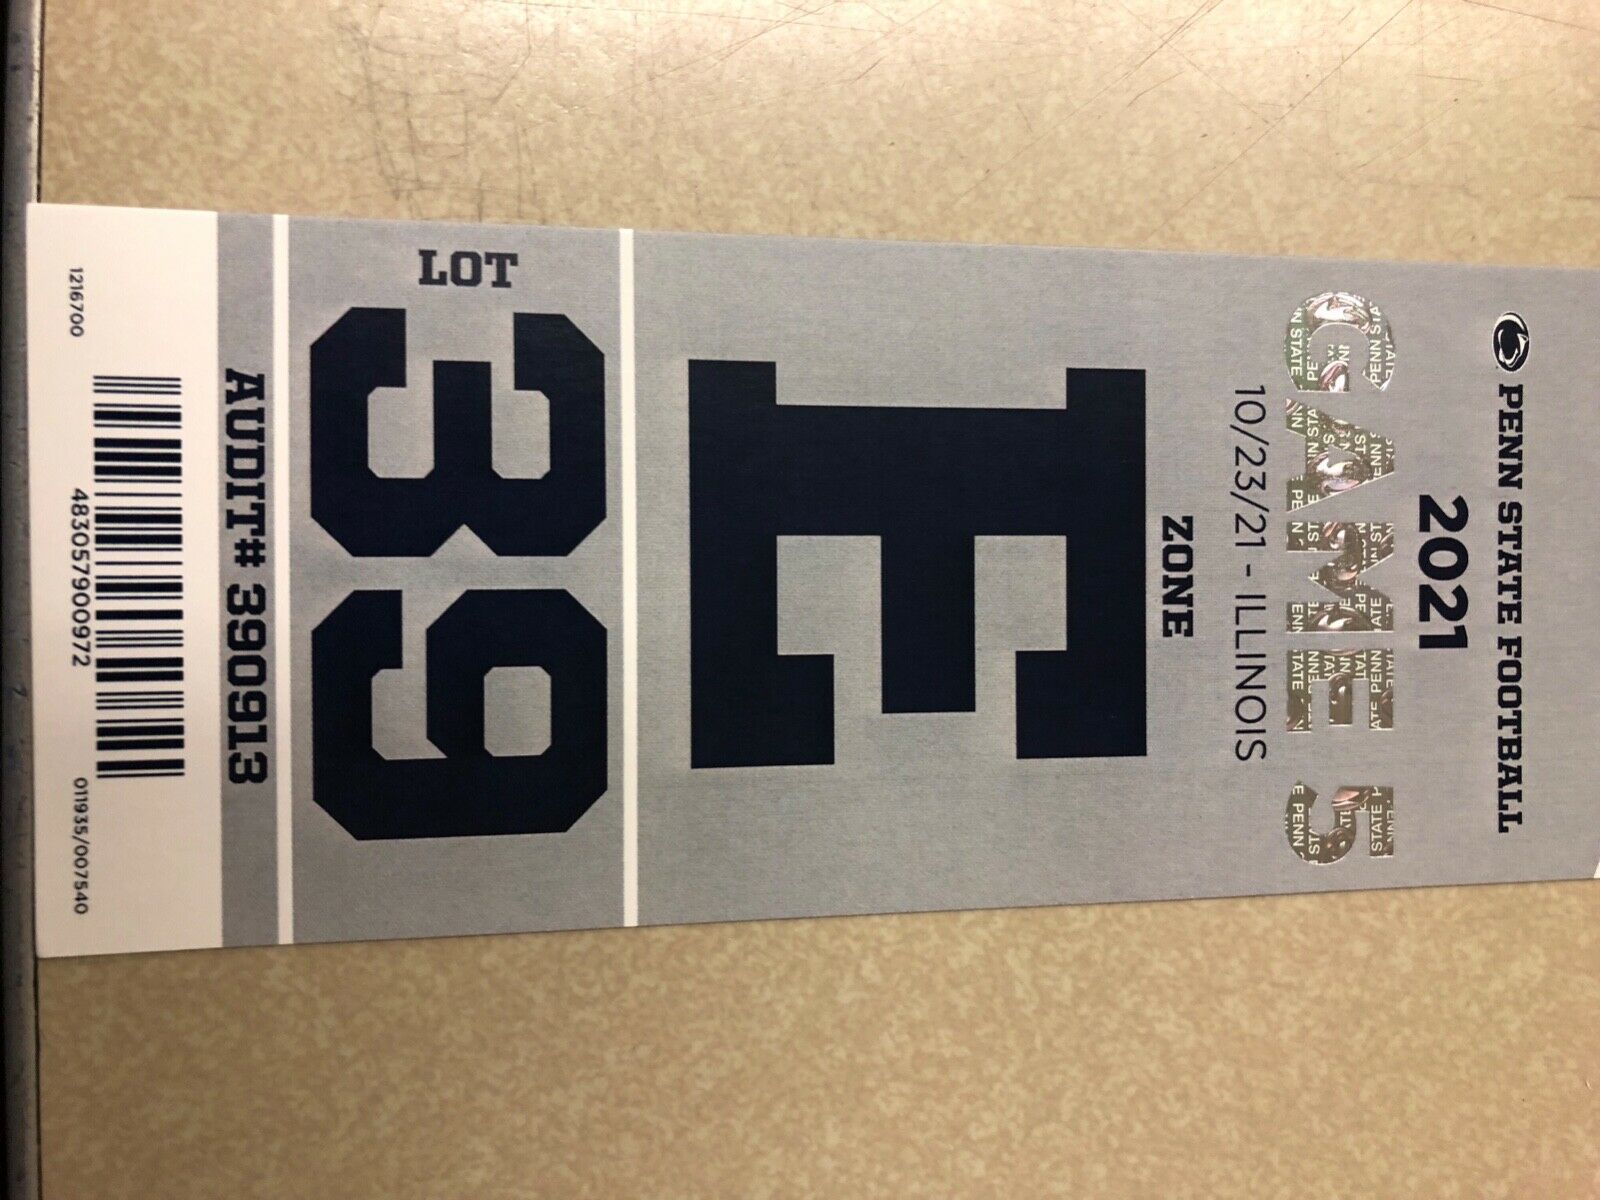 Penn State Vs Illinois Parking Pass October 23, 2021 Zone E And Lot 39